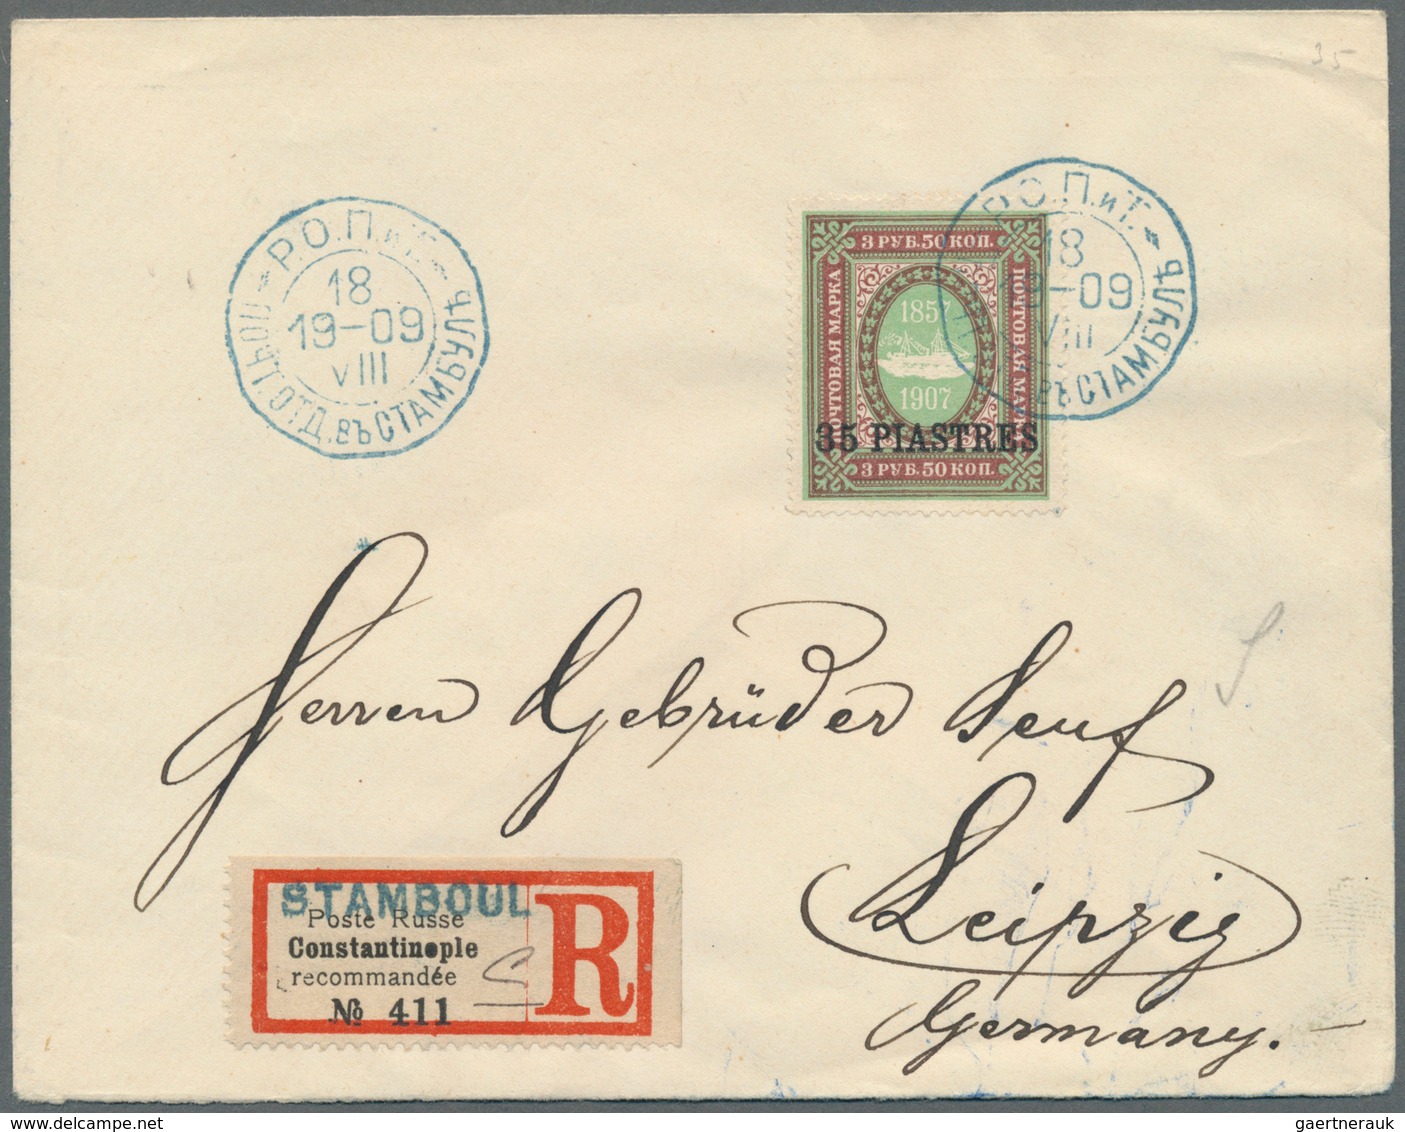 Russische Post In Der Levante - Staatspost: 1909, 35pi. On 3.50rbl. Green/brown, Single Franking On - Levant